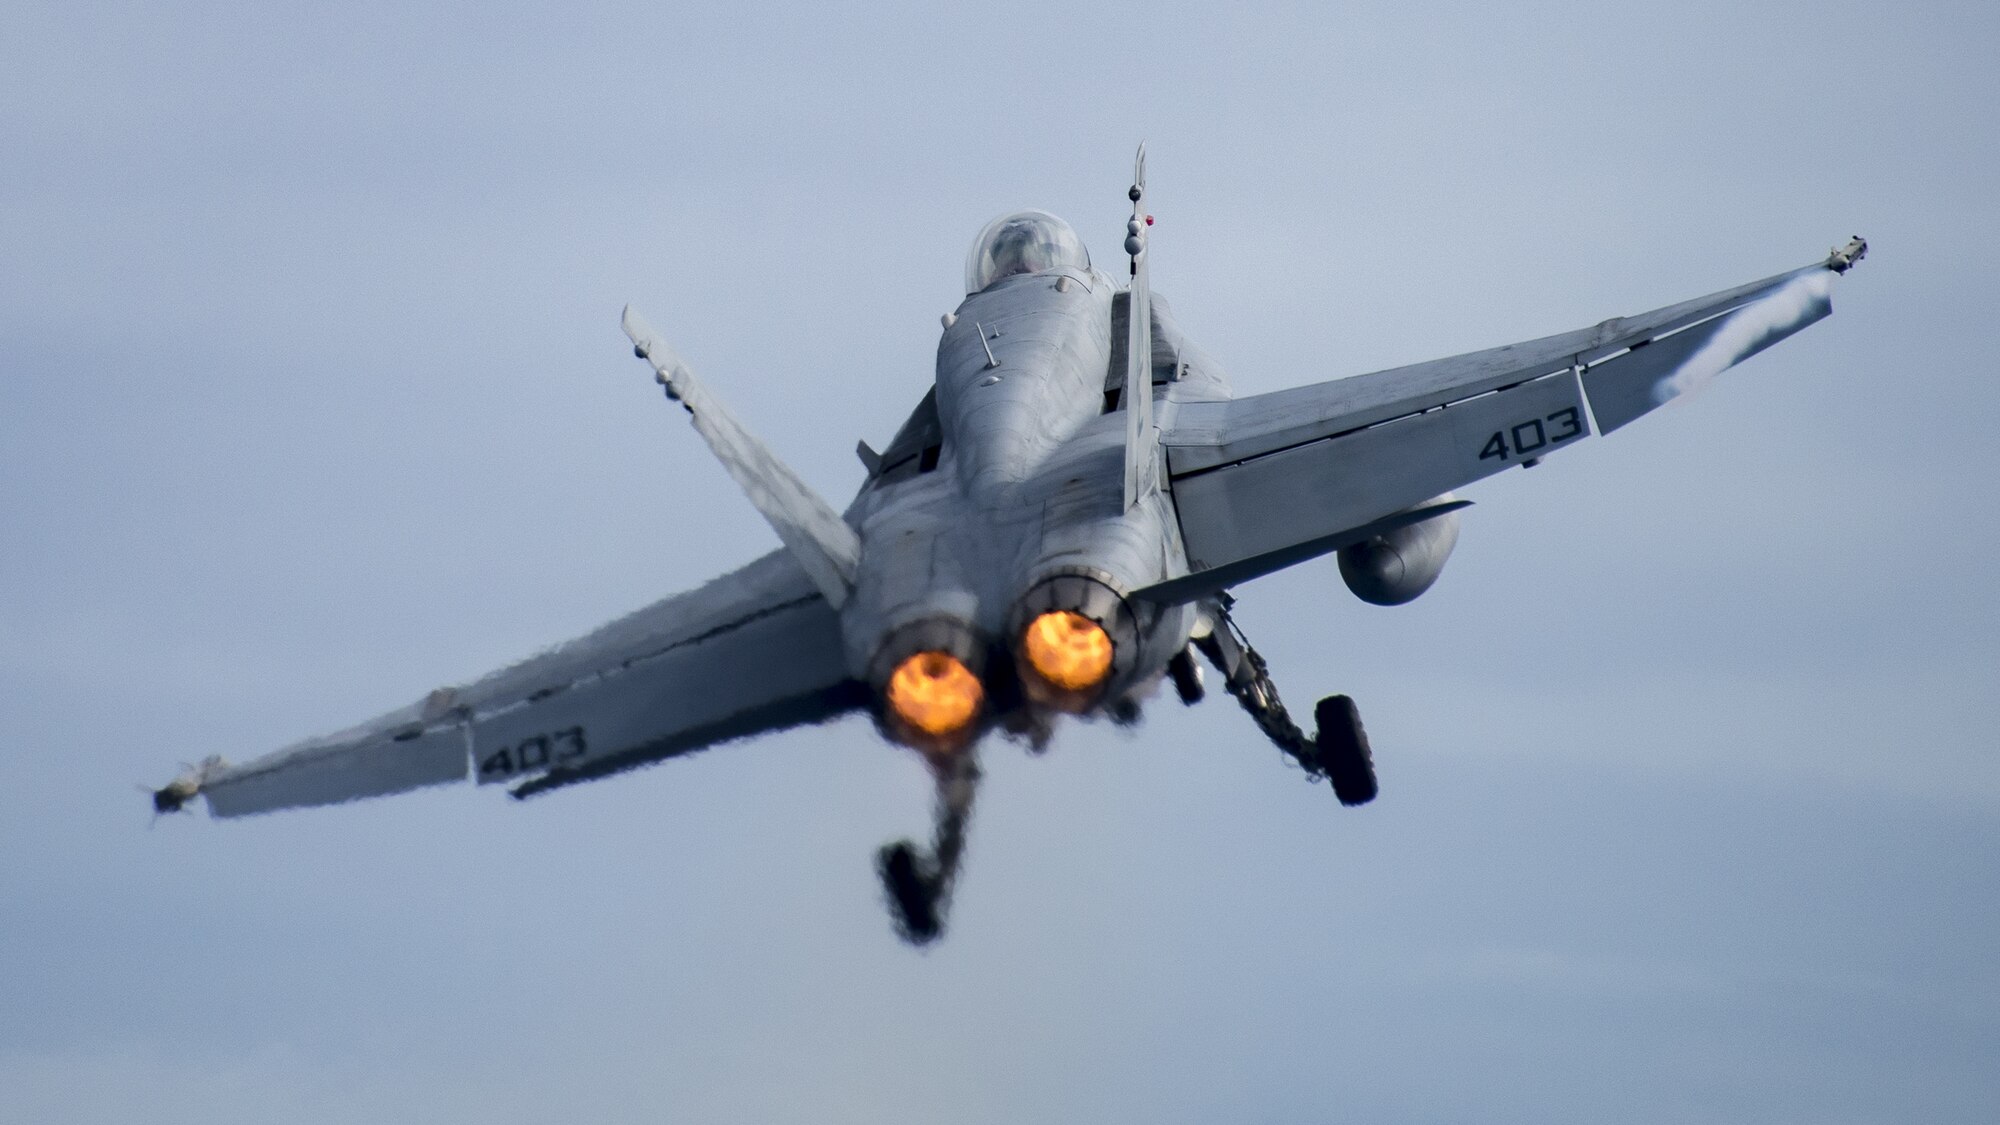 A U.S. Navy F/A-18C Hornet assigned to Strike Fighter Squadron (VFA) 34 takes off from the aircraft carrier USS Carl Vinson (CVN 70) during flight operations Jan. 25, 2017, on the Pacific Ocean. The Carl Vinson Carrier Strike Group is on a Western Pacific deployment as part of the U.S. Pacific Fleet-led initiative to extend the command and control functions of U.S. 3rd fleet. (U.S. Navy photo by Mass Communication Specialist 2nd Class Sean M. Castellano/Released)